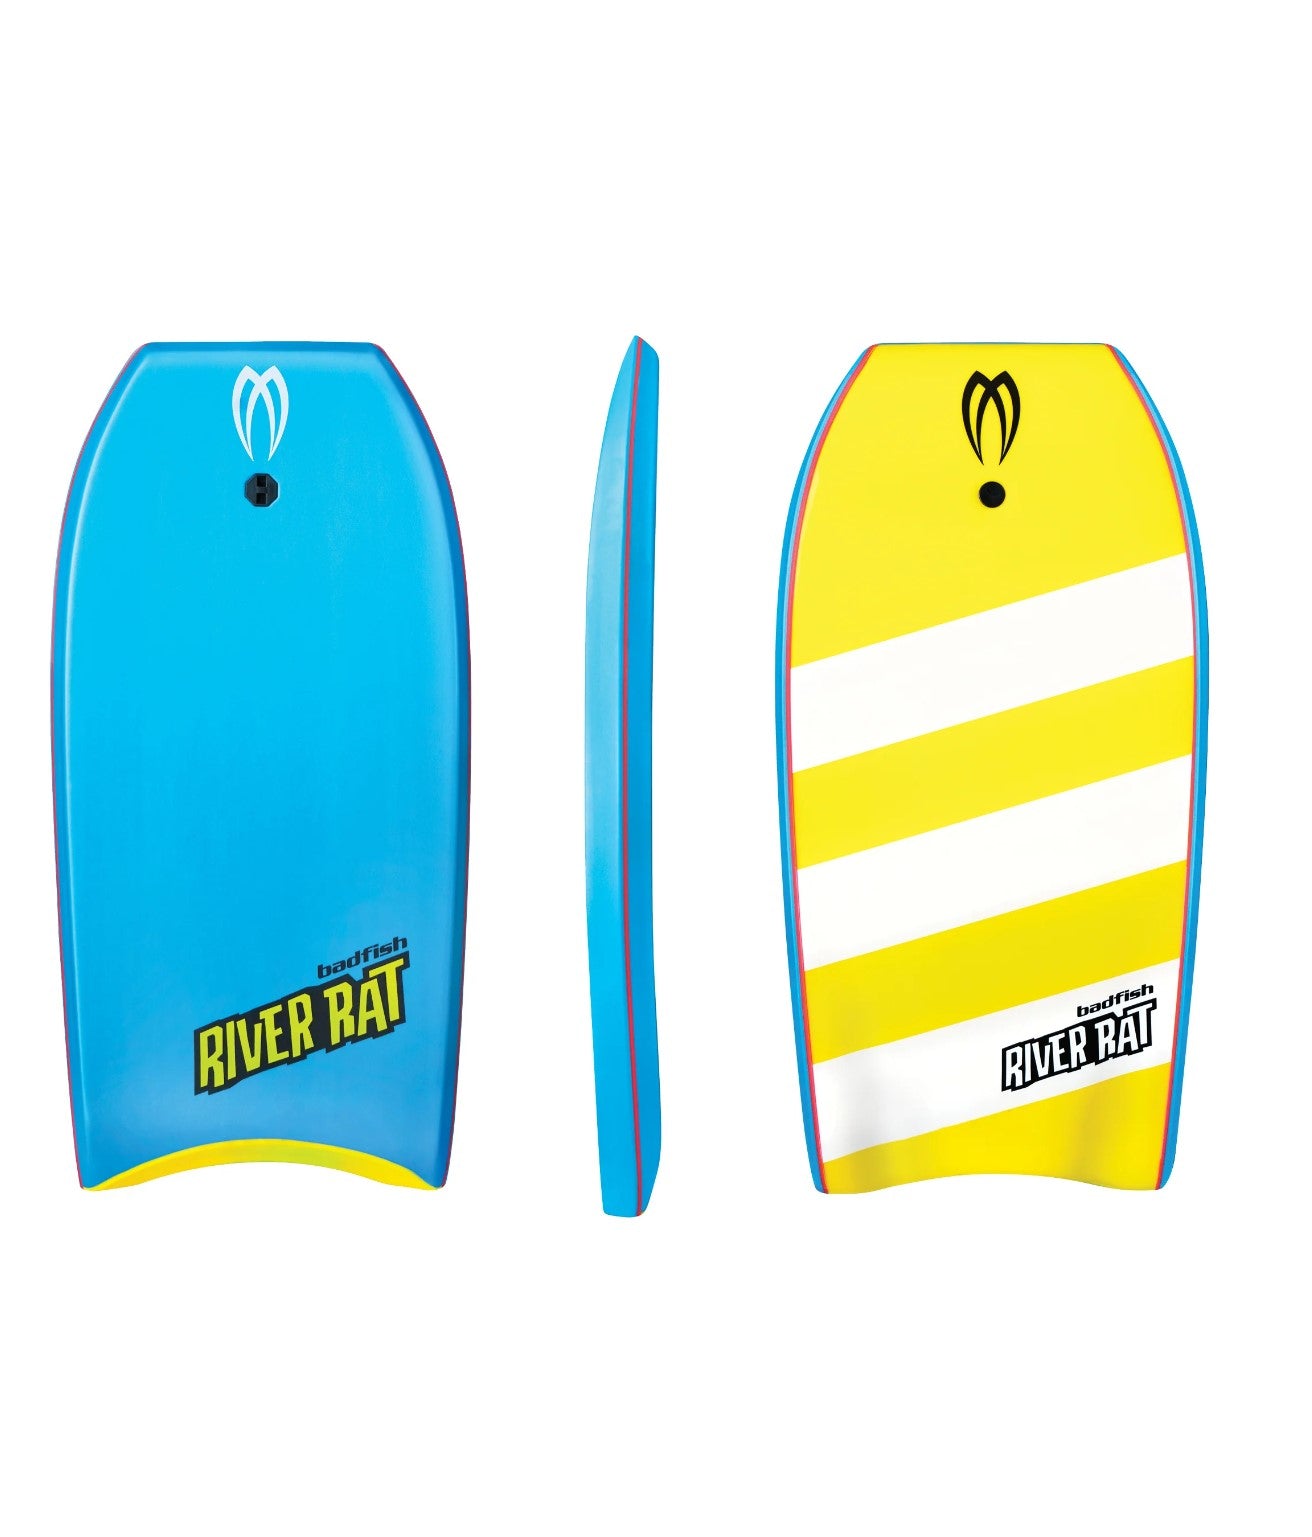 Surfboard sold by RIver Station Gear